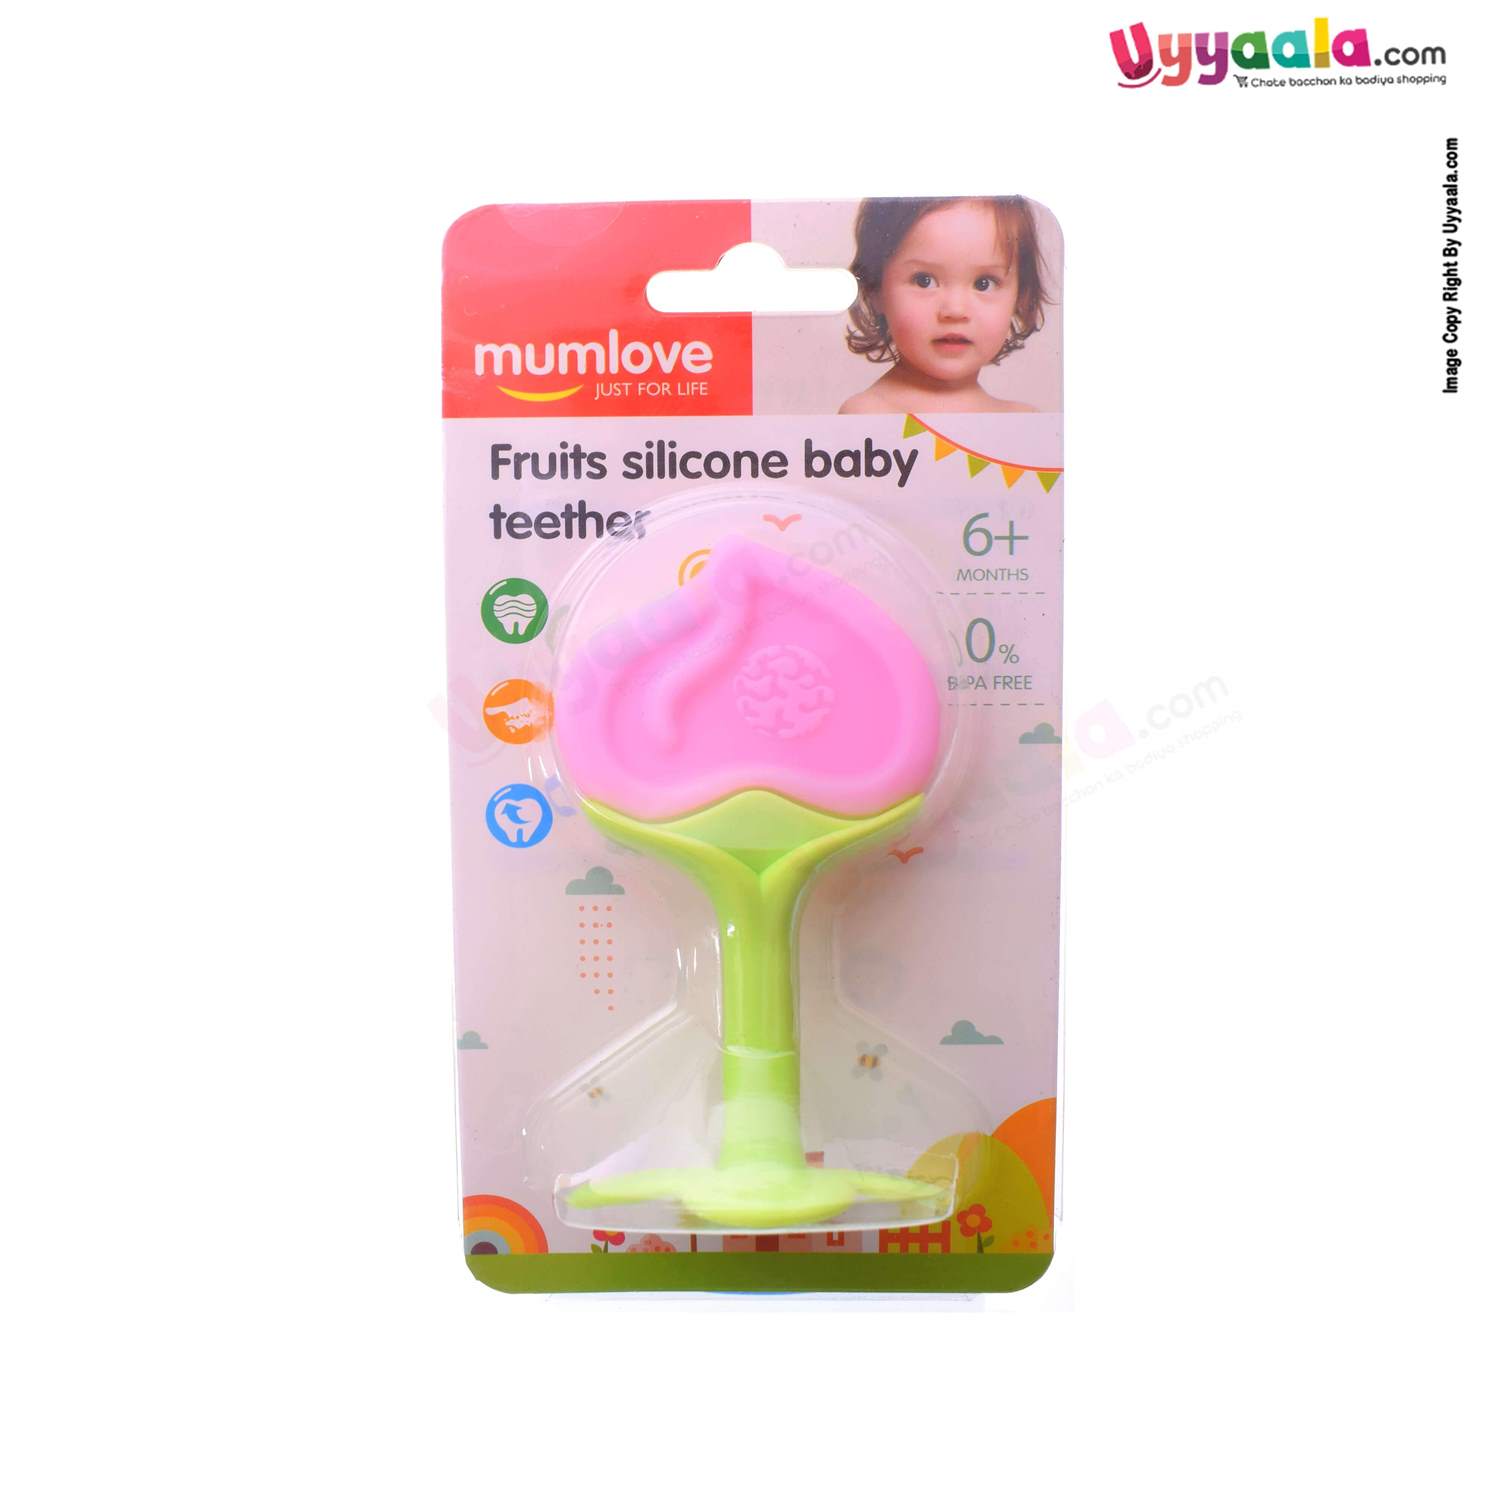 MUMLOVE  Fruits Silicone Baby Teether 6+m Age - Pink, Green